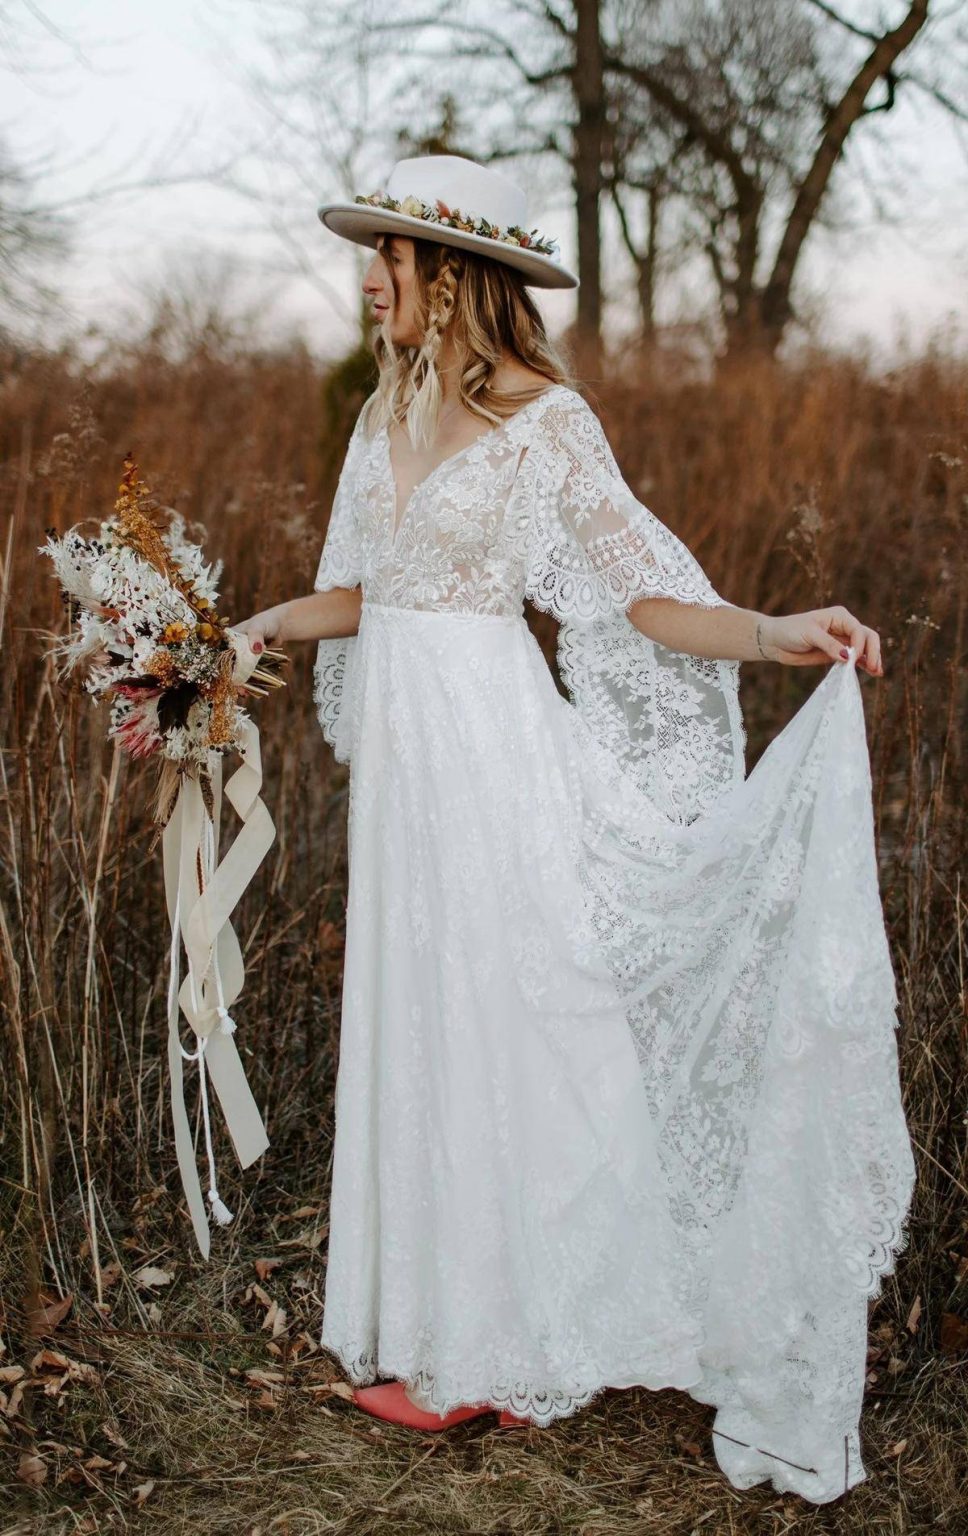 Boho Beach Wedding Dress With Lace Skirt And Detachable Sleeves 968x1536 